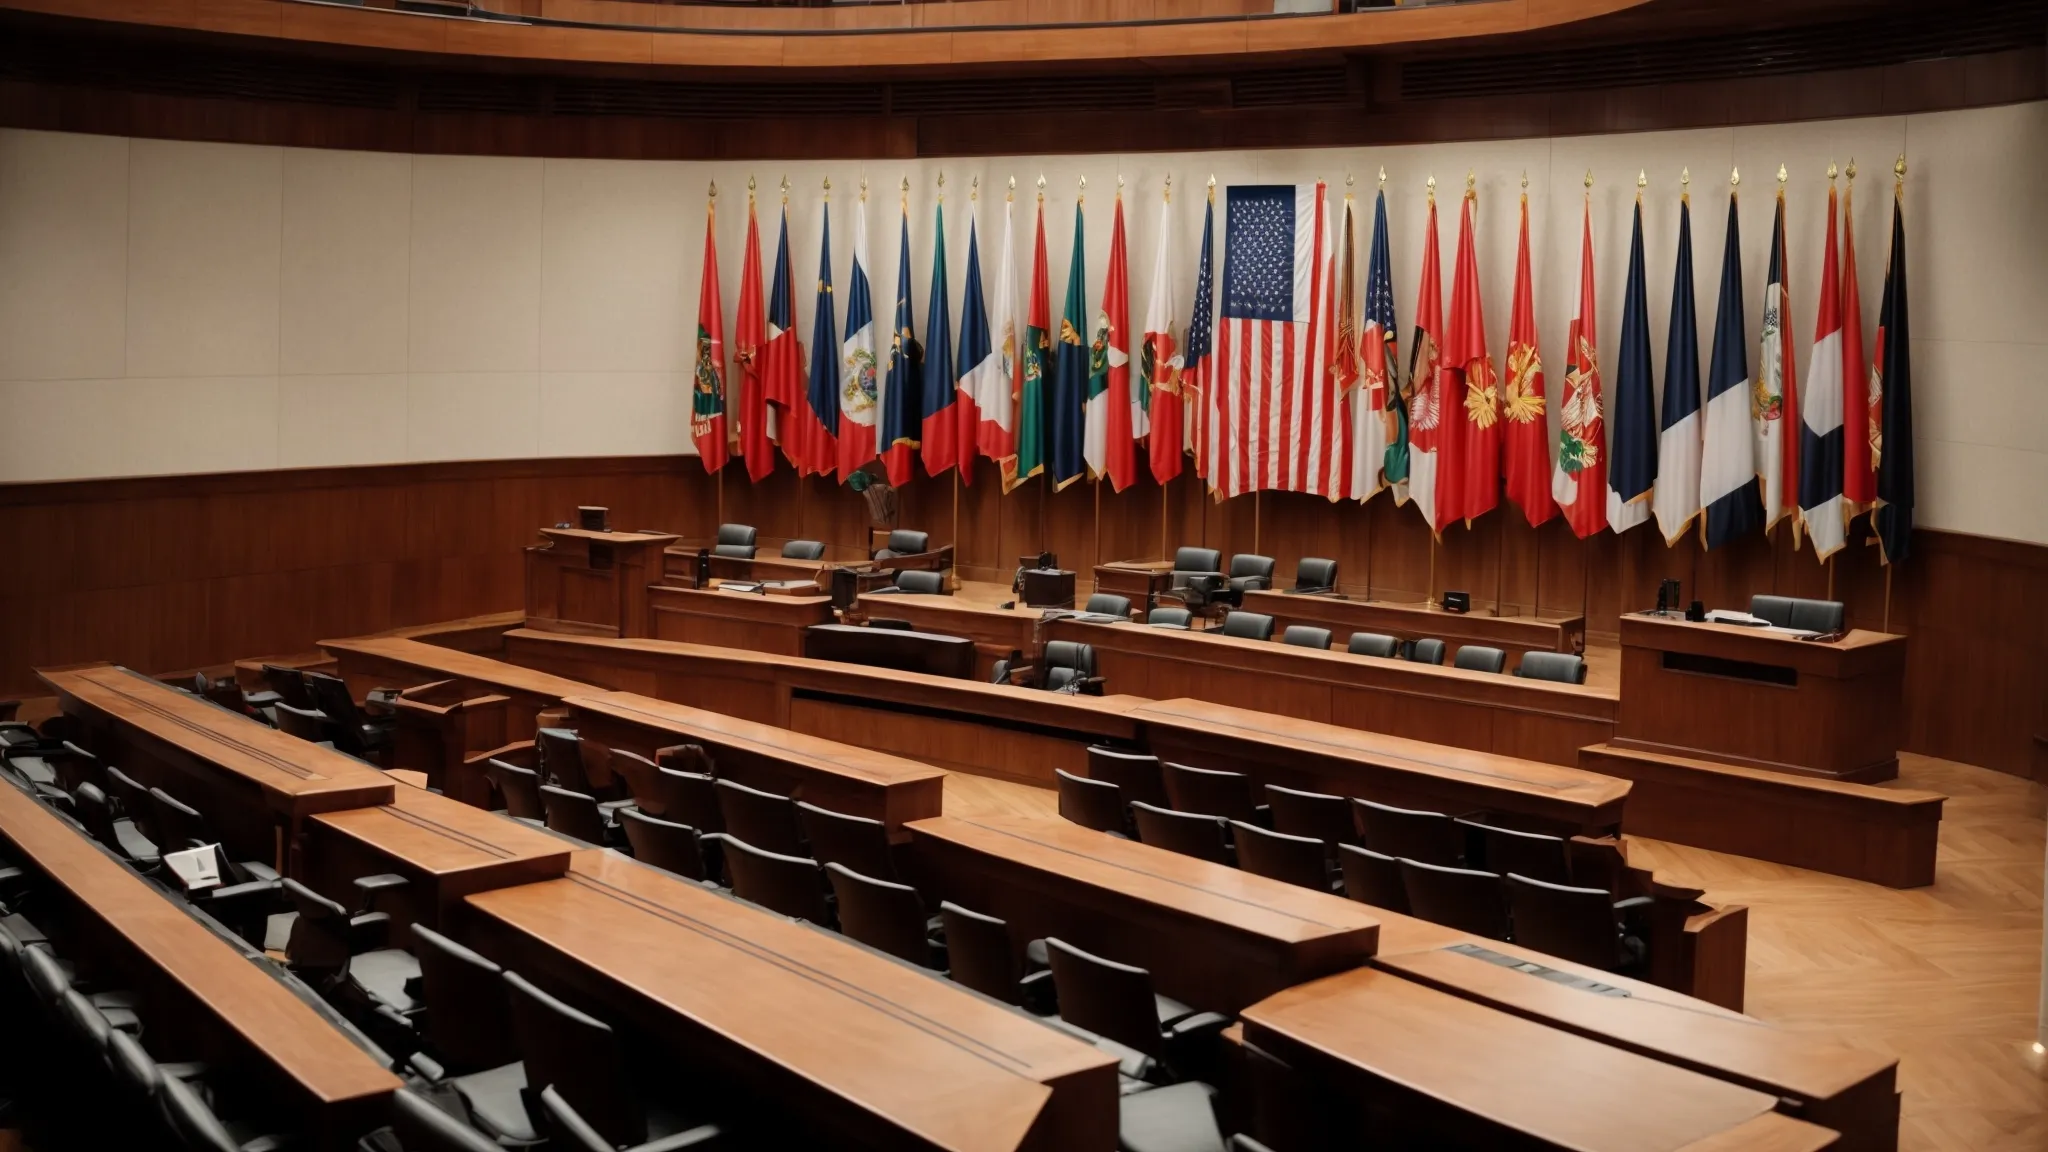 a grand courtroom with national flags and a large, imposing arbitration table at the center, signifying the stage where isds issues are deliberated.